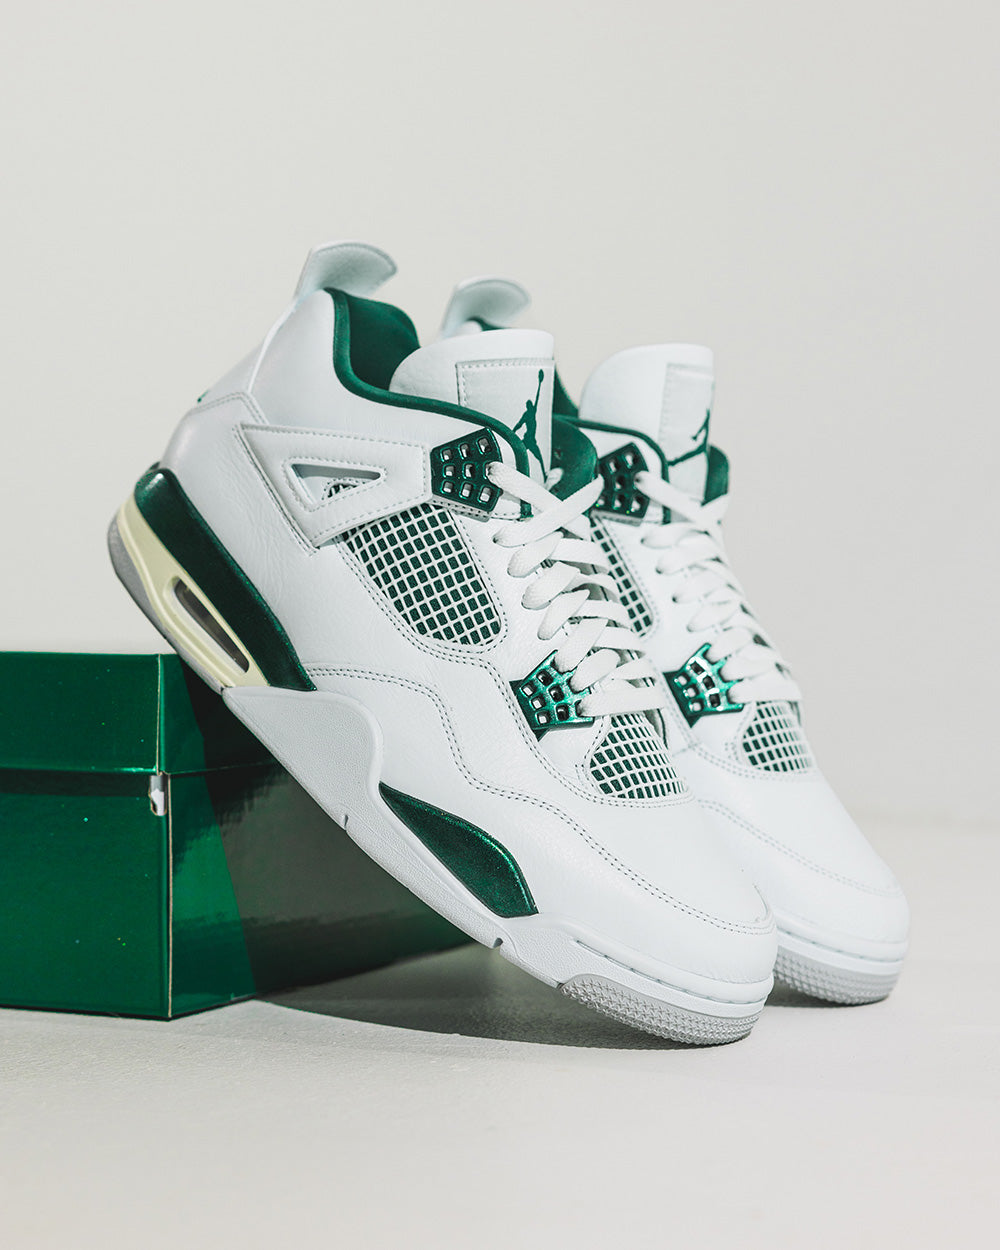 Early Look: Air Jordan 4 "Oxidized Green" Release This Summer